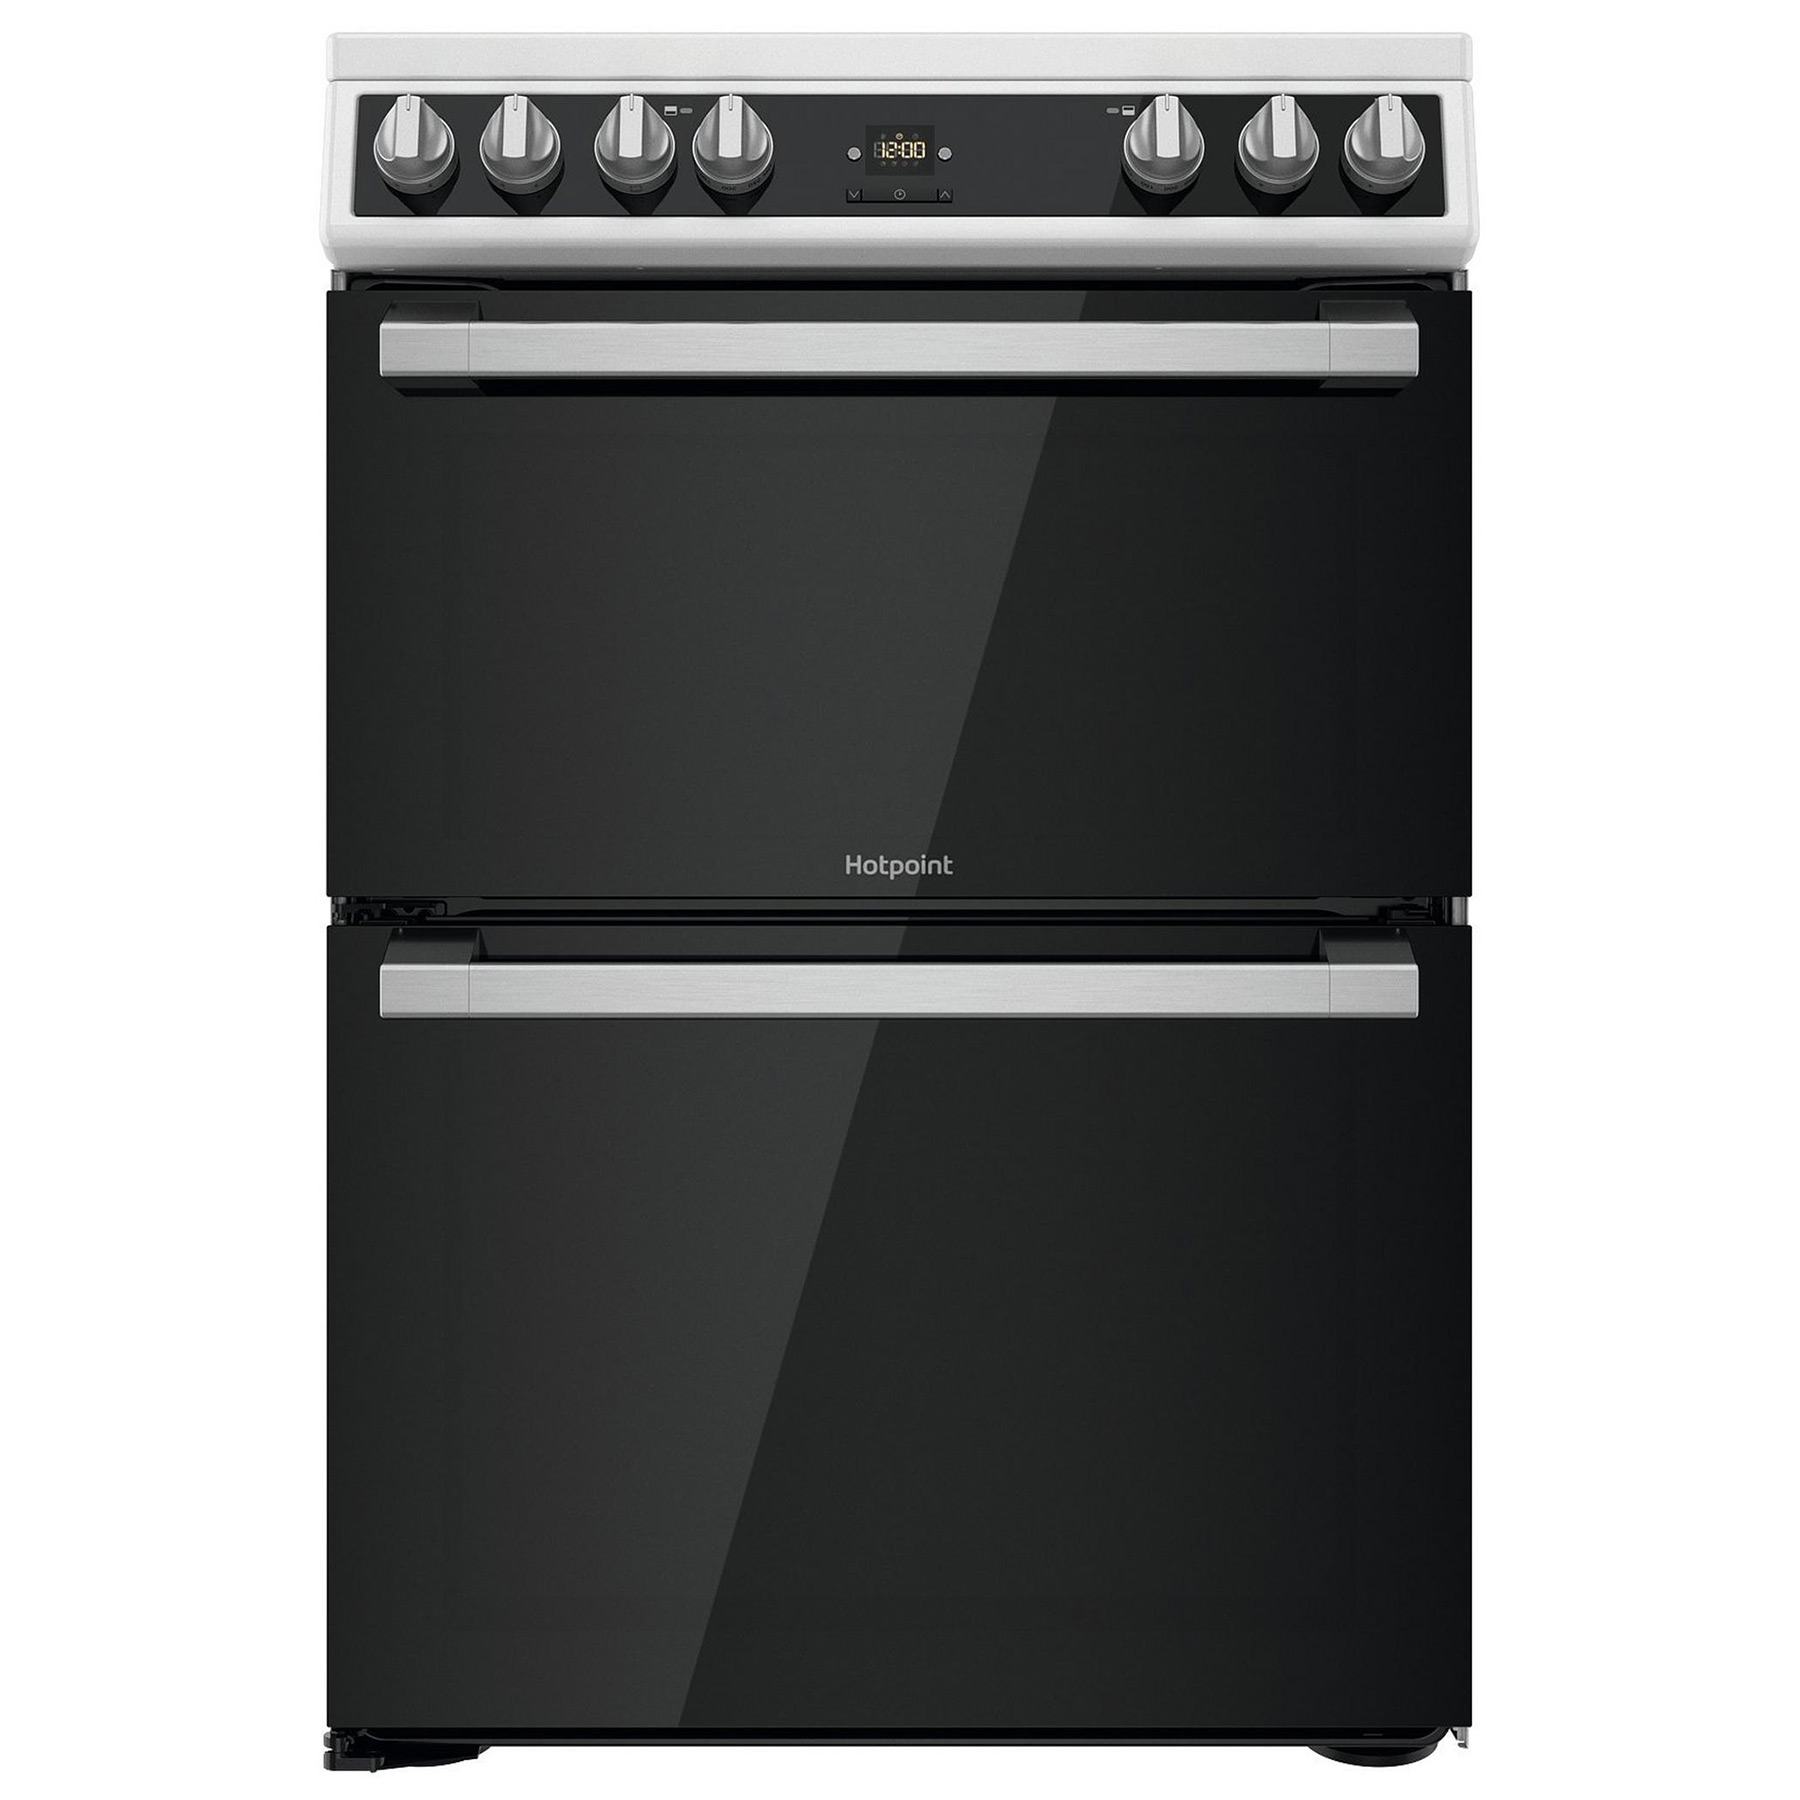 Image of Hotpoint HDT67V9H2CW 60cm Double Oven Electric Cooker in White Ceramic